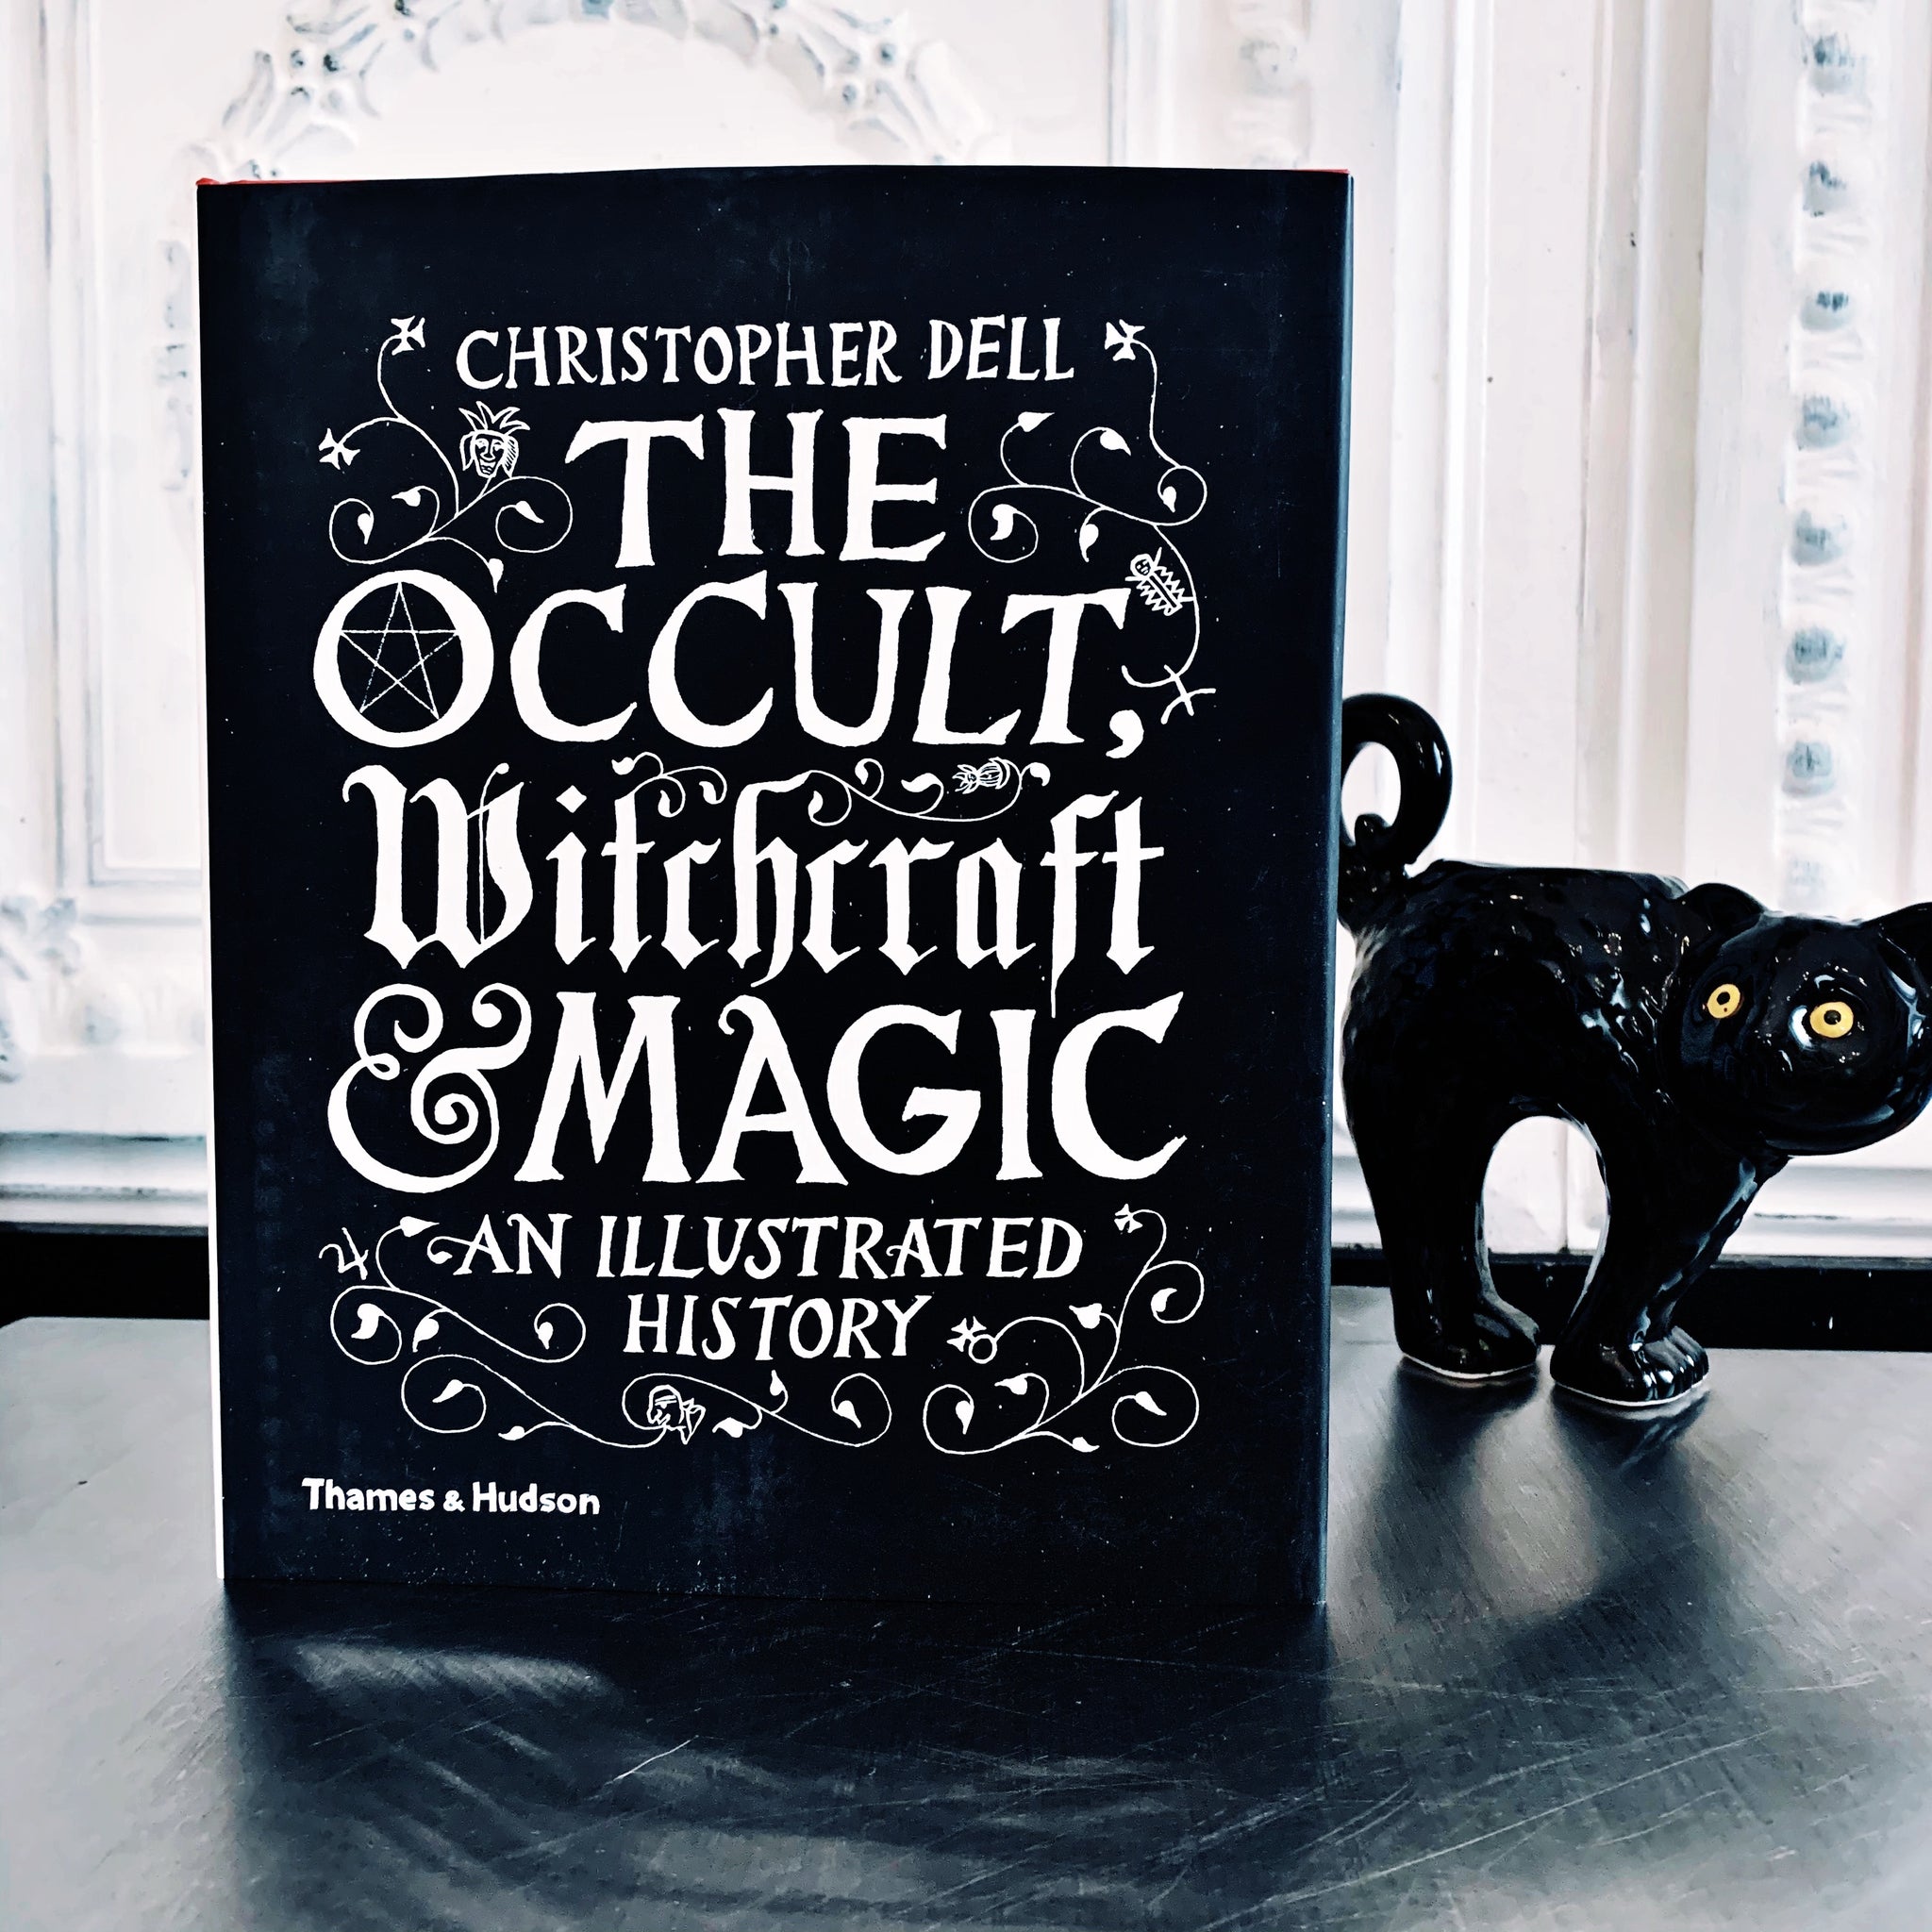 Occult Witchcraft & Magic - Illustrated History